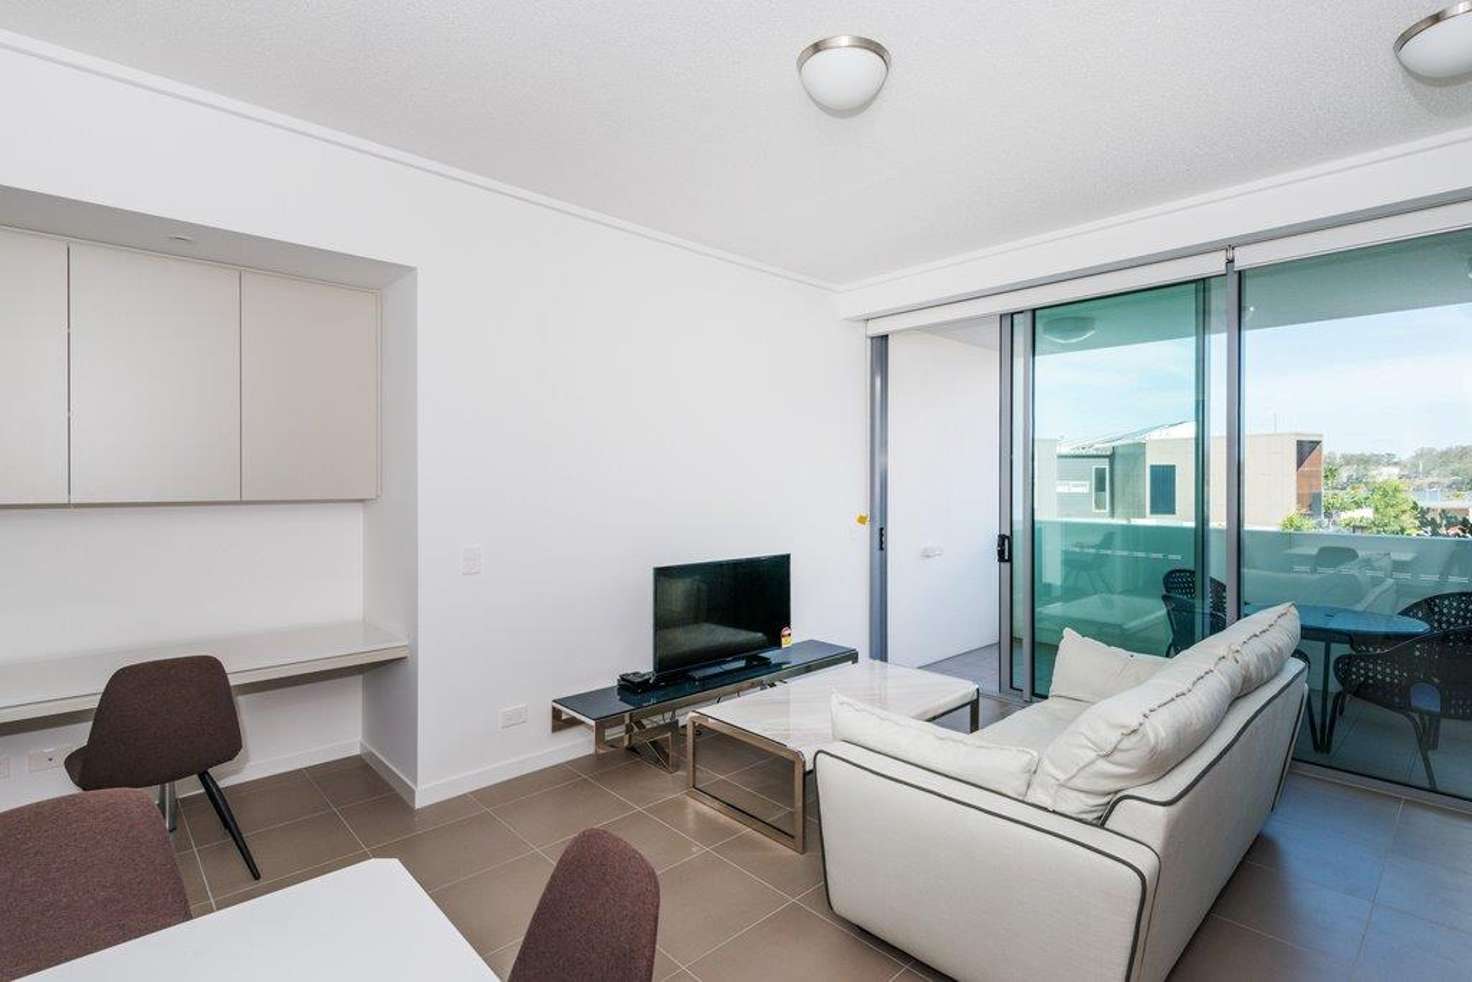 Main view of Homely apartment listing, 3214/126 Parkside Circuit, Hamilton QLD 4007